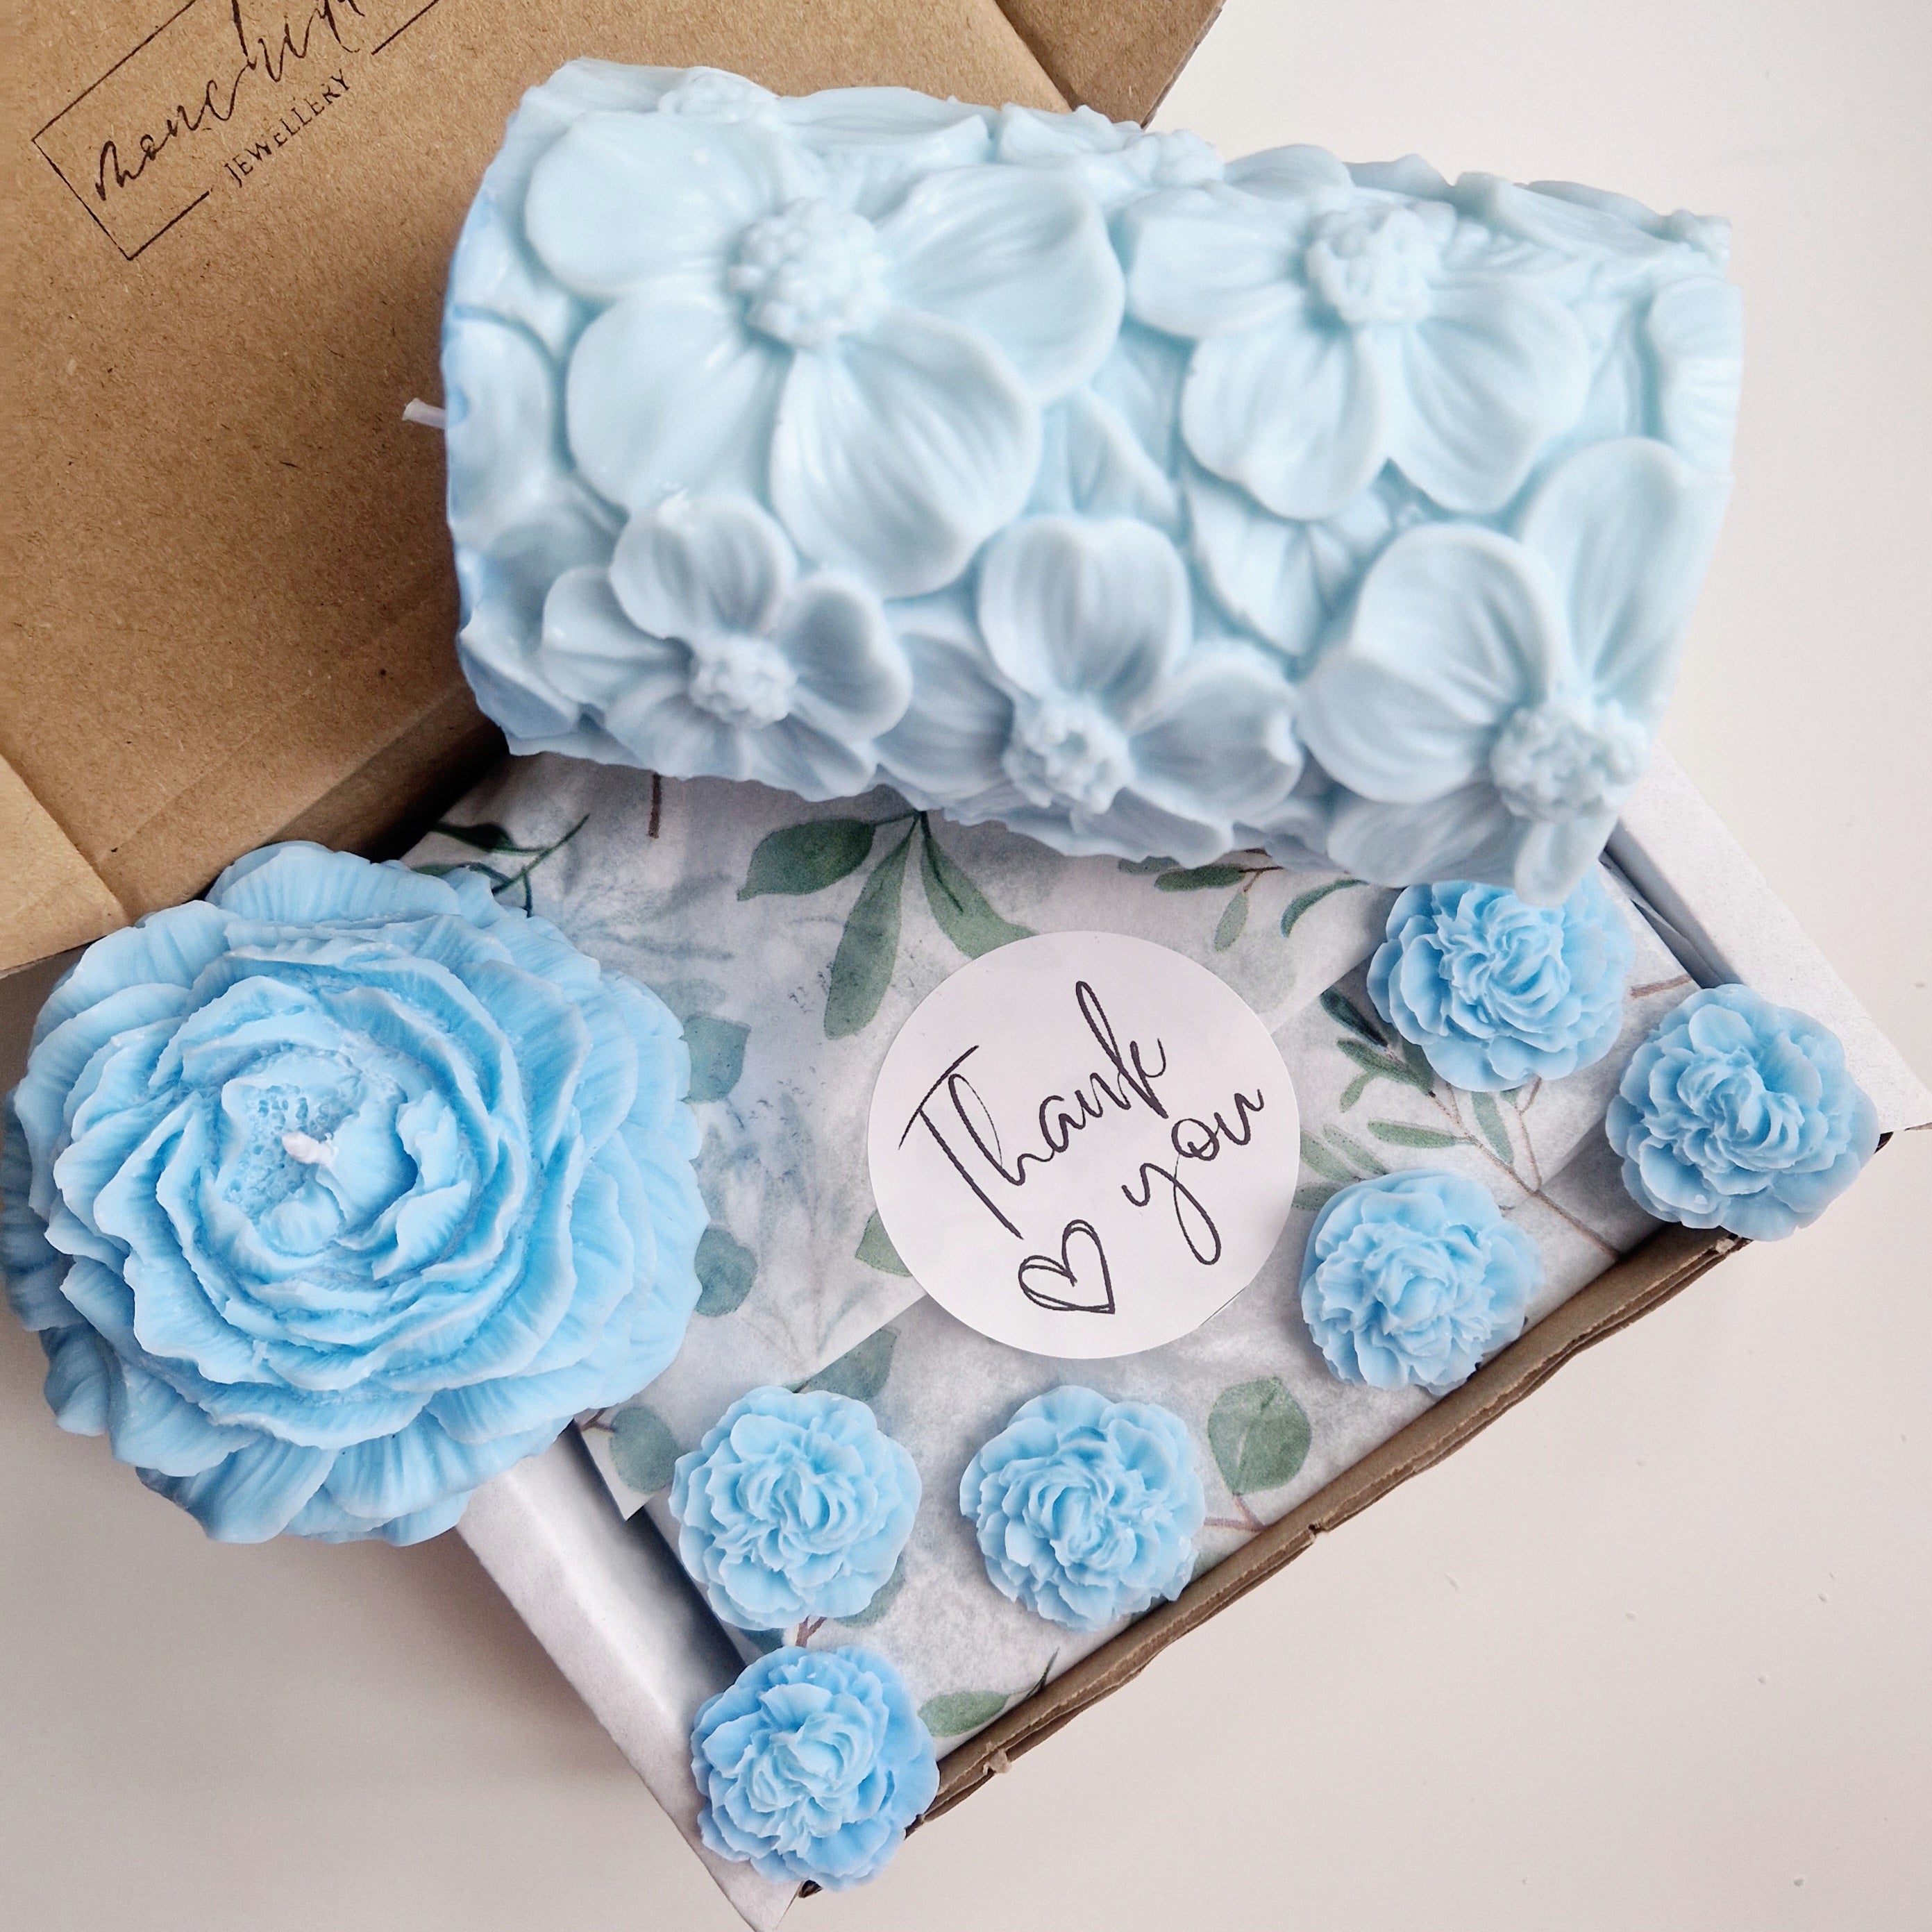 gift bundle with blue candles and wax melts